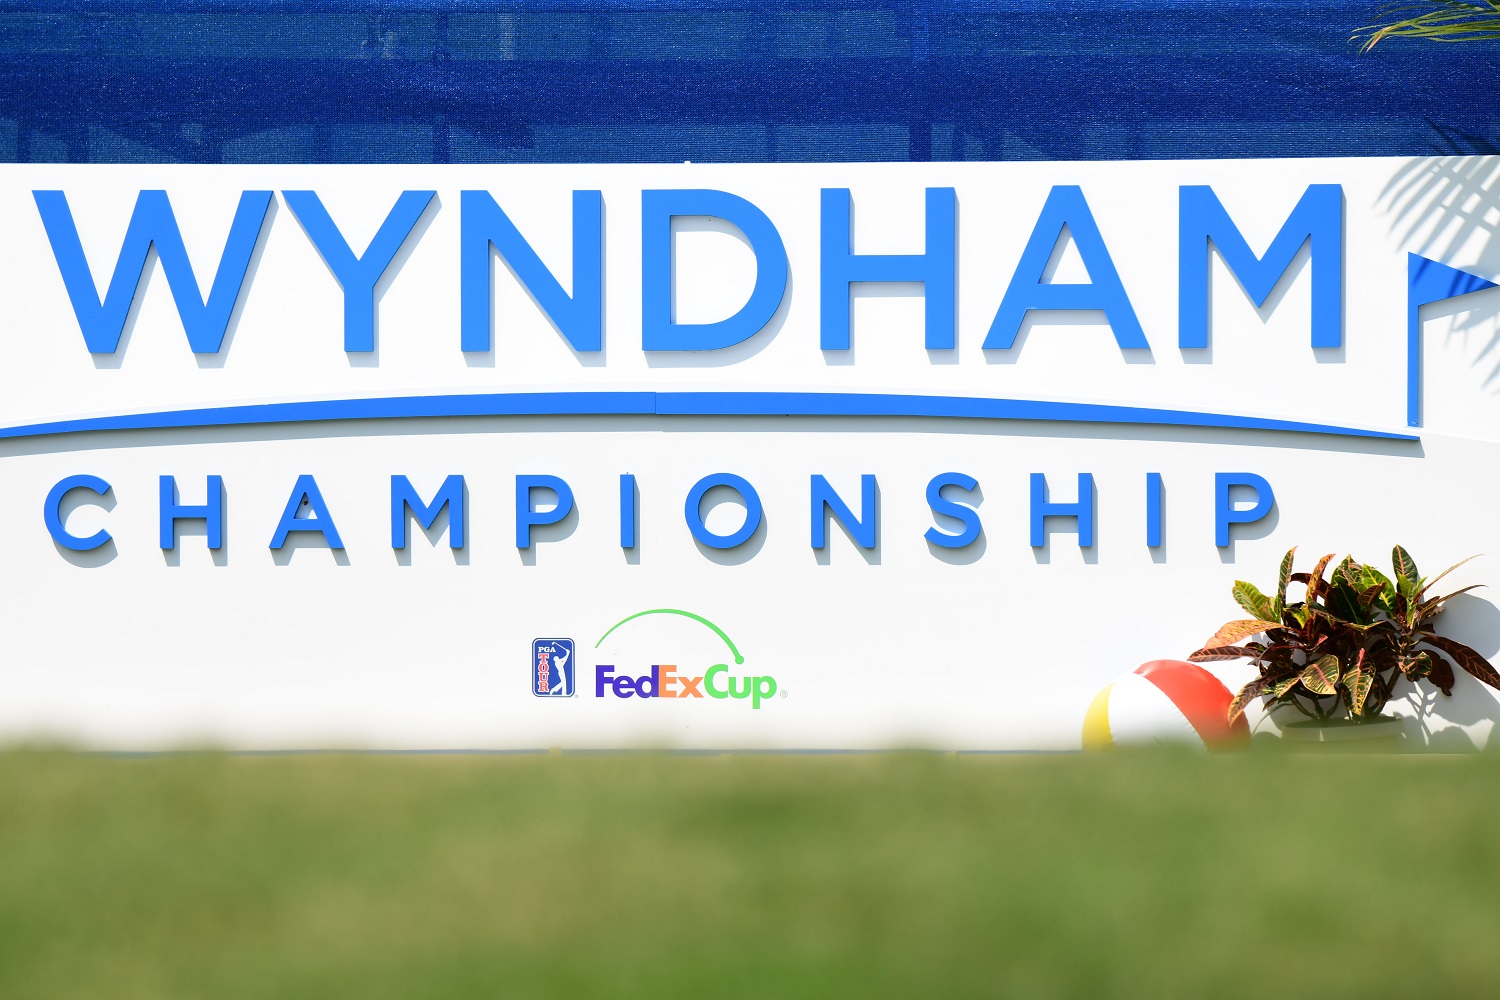 With the PGA Tour FedEx Cup Playoffs On the Horizon, the Wyndham